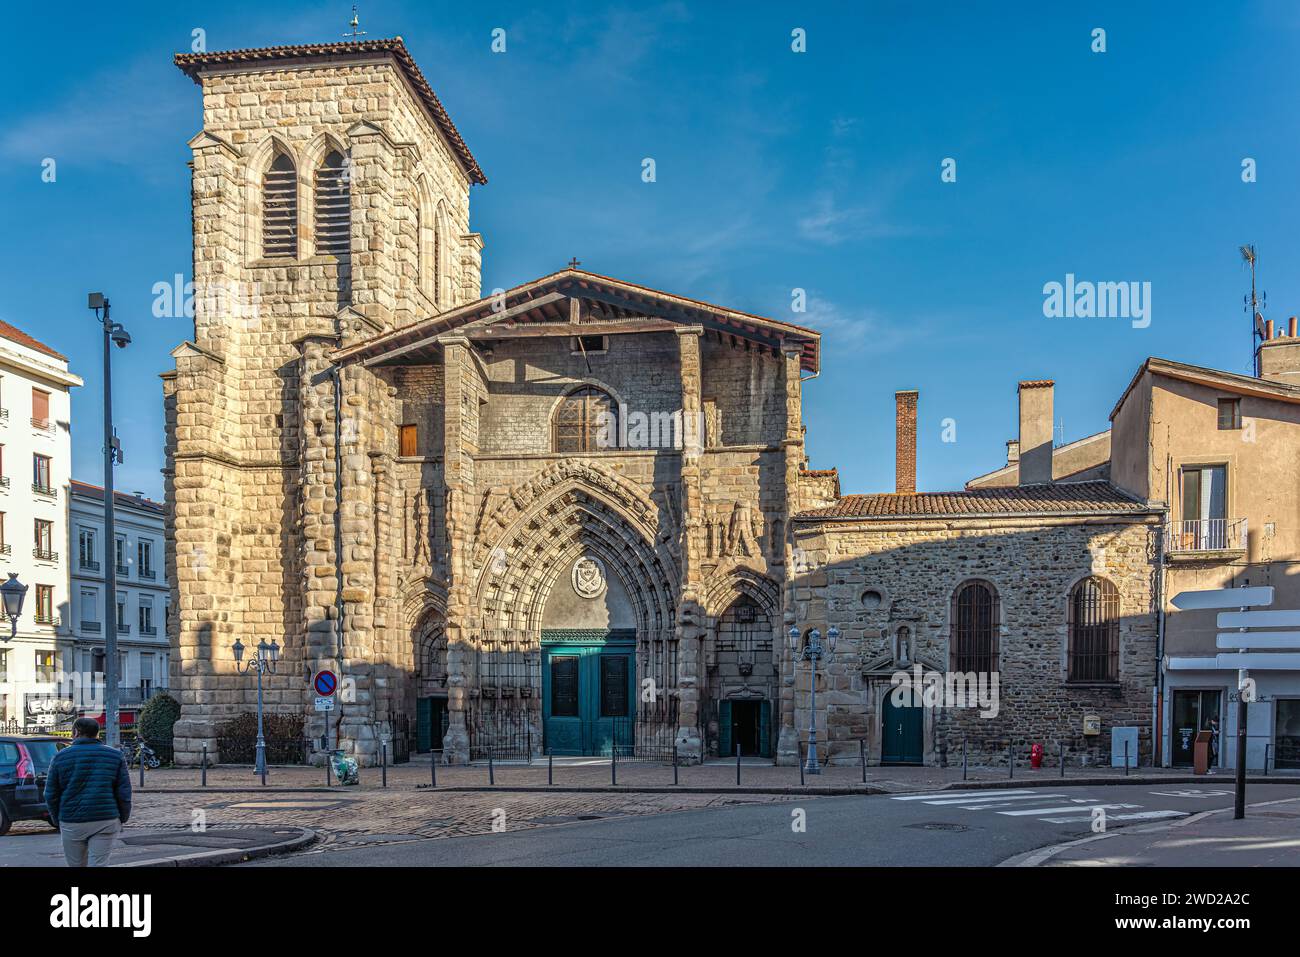 The Gothic-style facade with the bell tower of the Grande Église de Saint-Étienne in the heart of the historic center of the city.Saint-Étienne,France Stock Photo